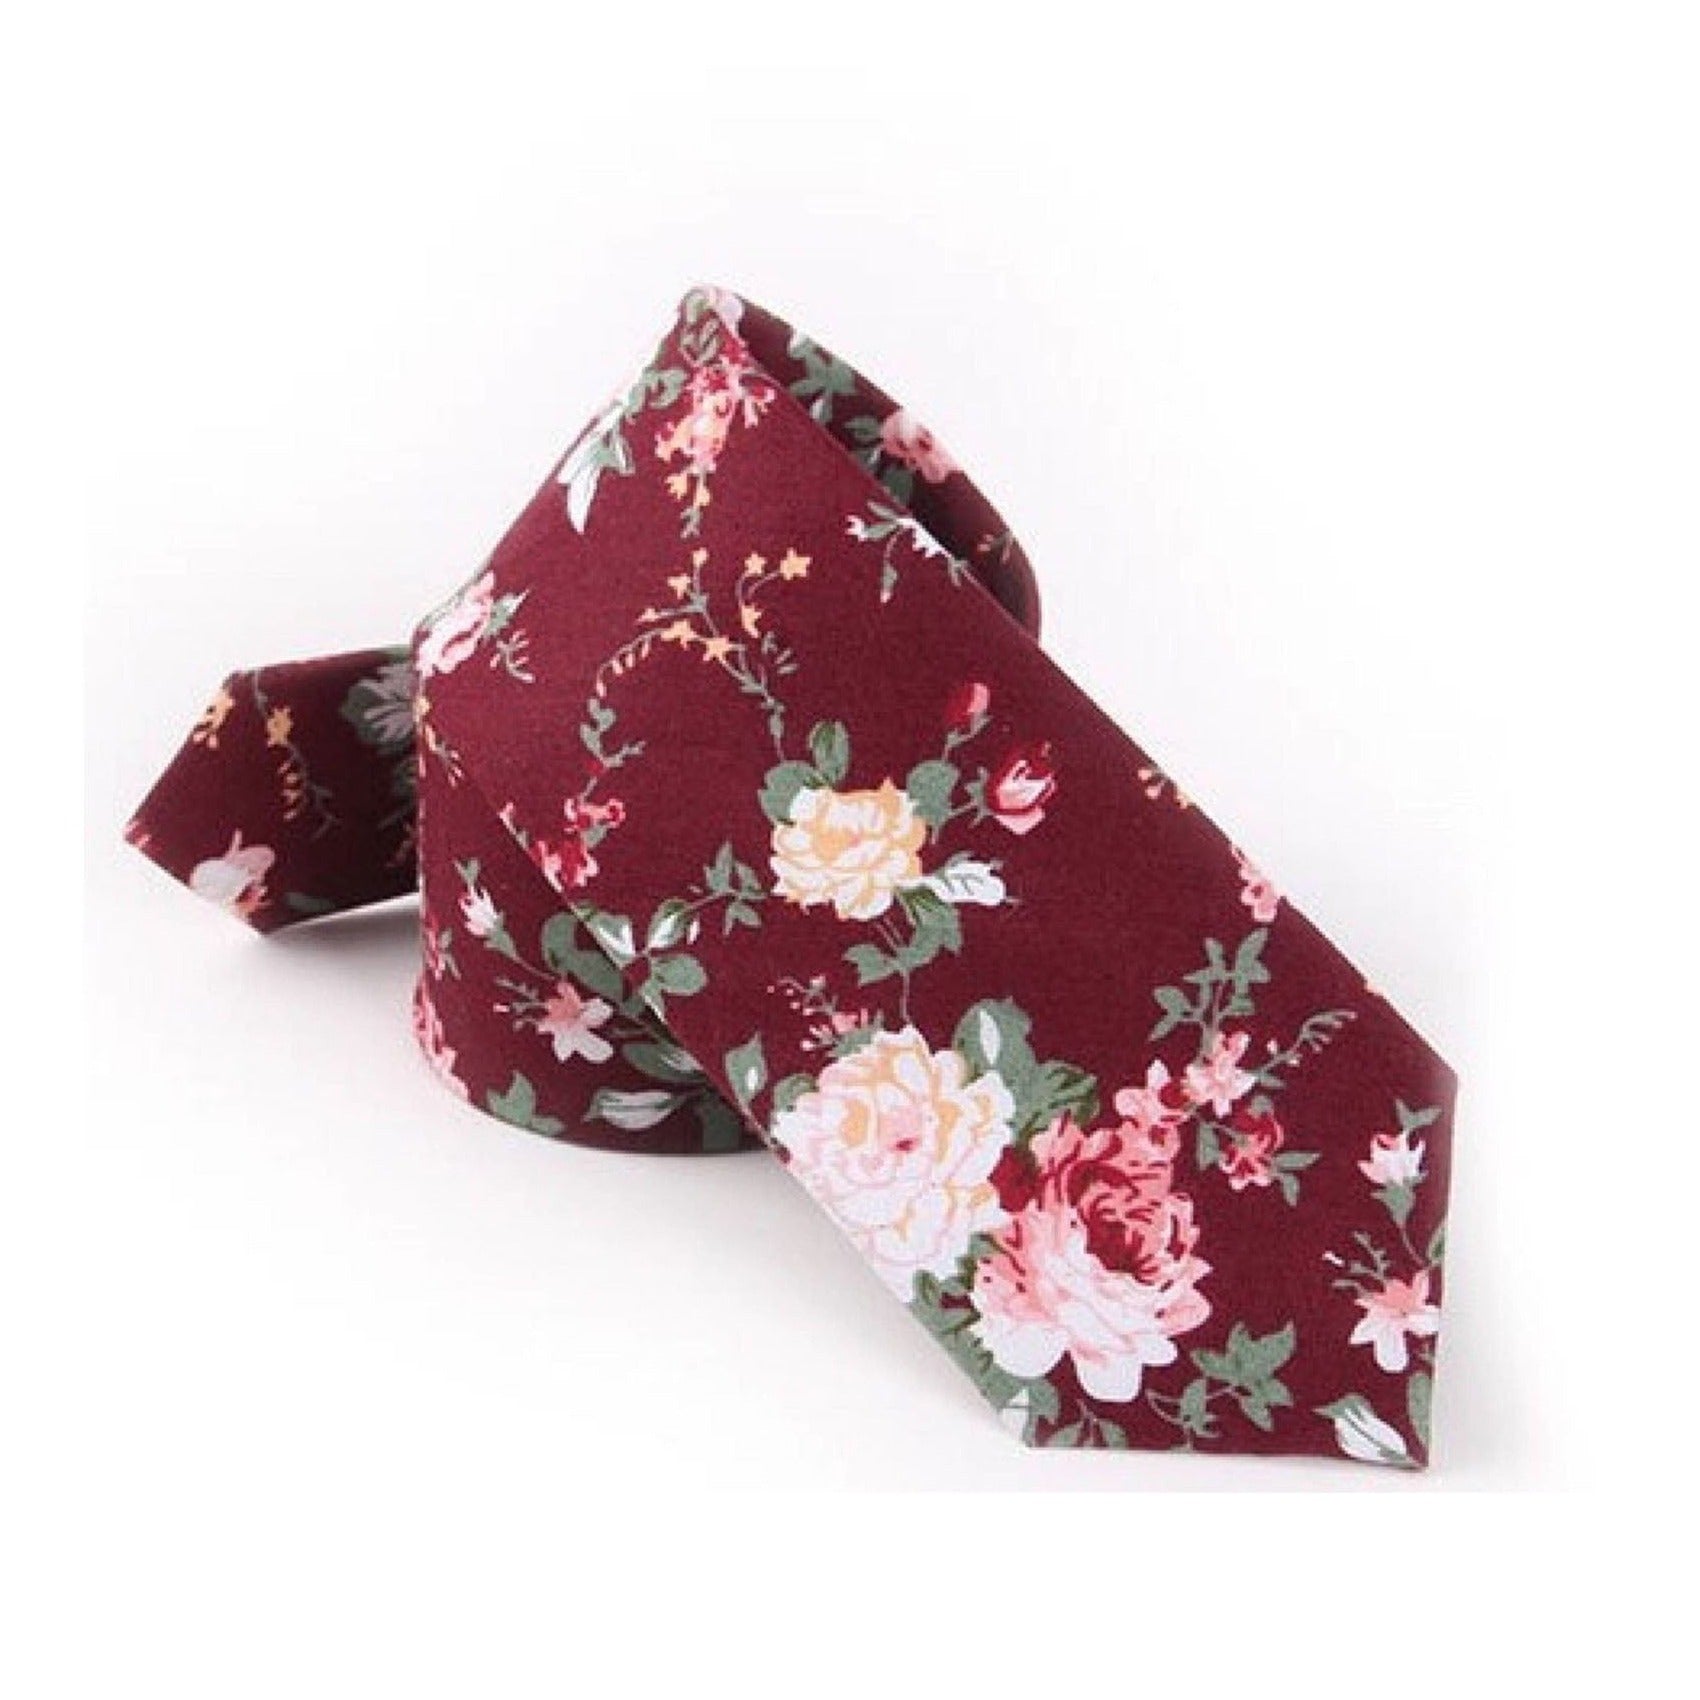 Burgundy Floral Tie for Weddings and Groom WESLEY MYTIESHOP-Neckties-Burgundy Floral Skinny Tie WESLEY wedding and events. Burgundy Base with Green and pink Flowers. great for the groom and his groomsmen. Prom elopements-Mytieshop. Skinny ties for weddings anniversaries. Father of bride. Groomsmen. Cool skinny neckties for men. Neckwear for prom, missions and fancy events. Gift ideas for men. Anniversaries ideas. Wedding aesthetics. Flower ties. Dry flower ties.